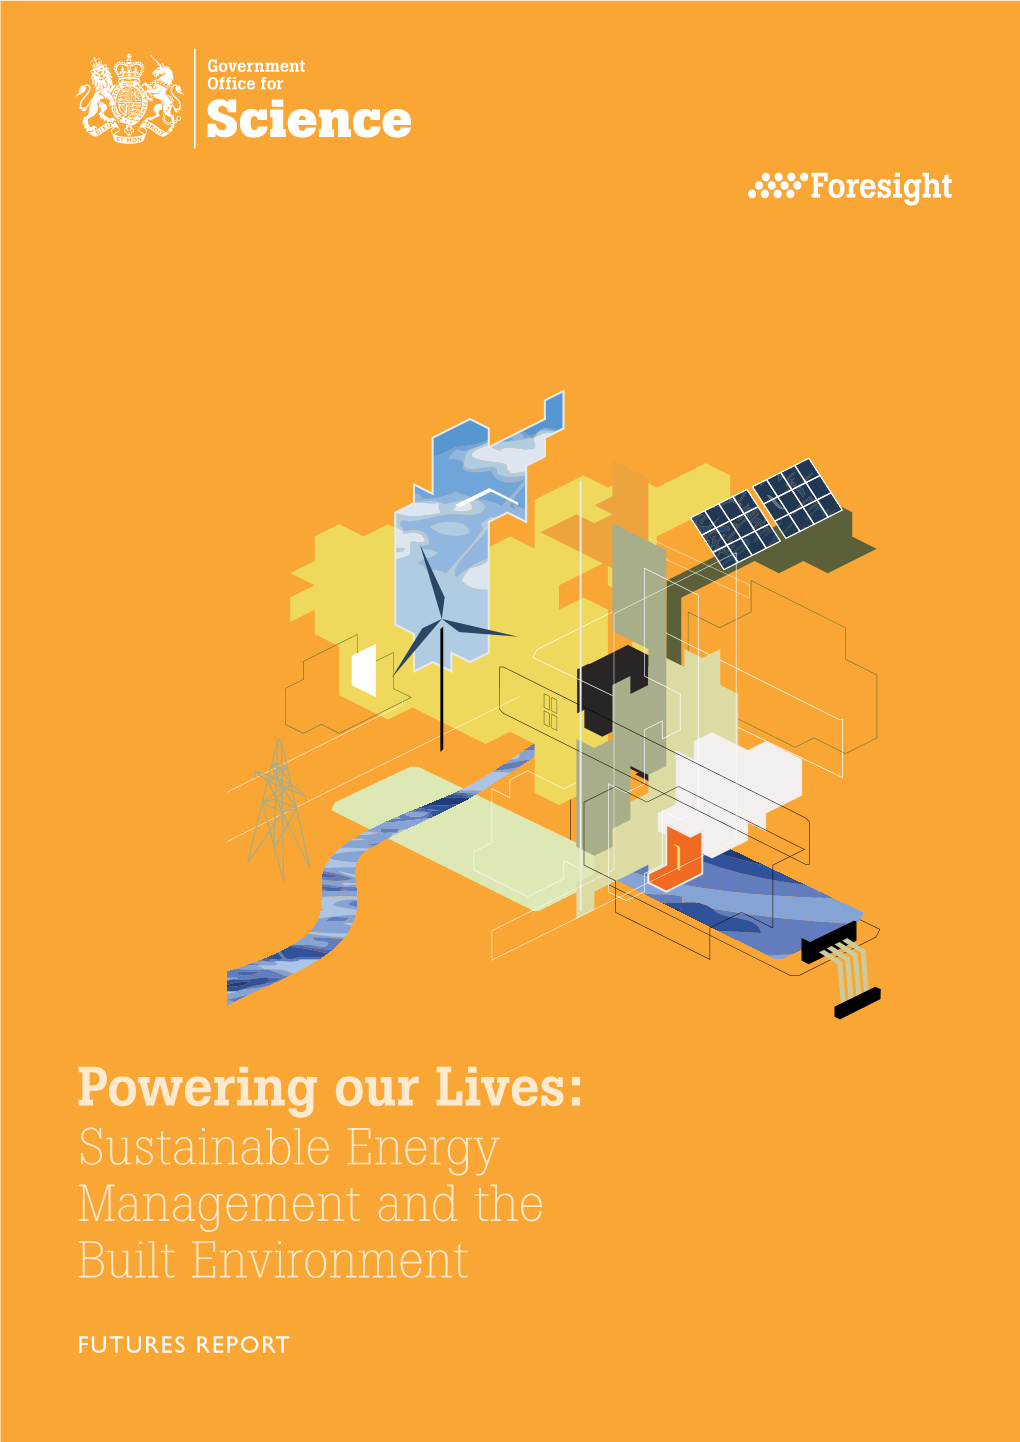 Powering Our Lives: Sustainable Energy Management and The